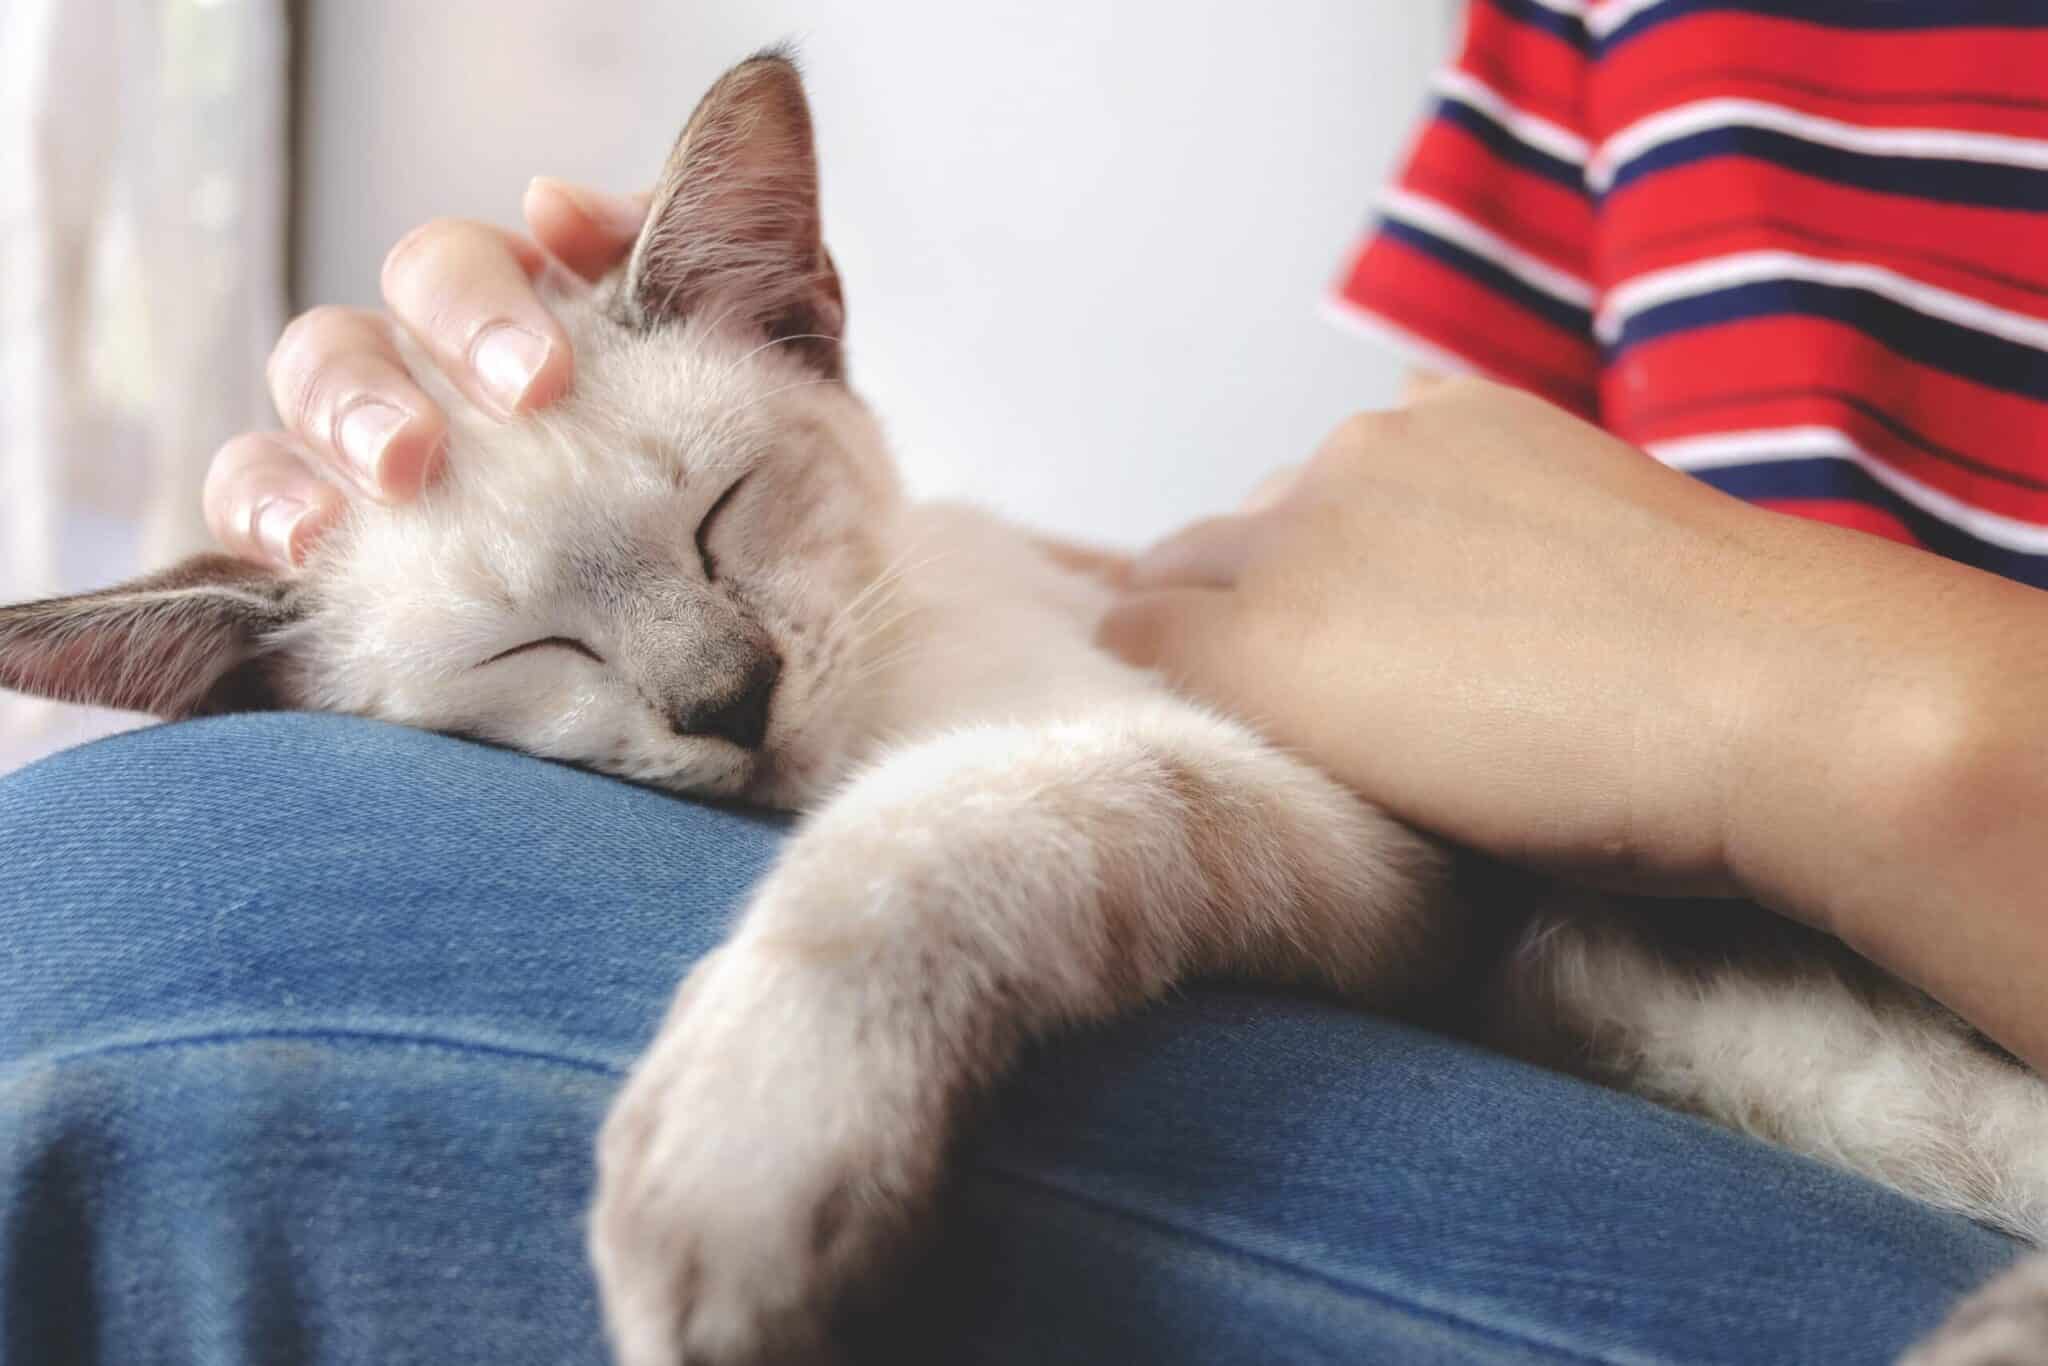 woman-owner-holding-little-white-cat-while-sleeping